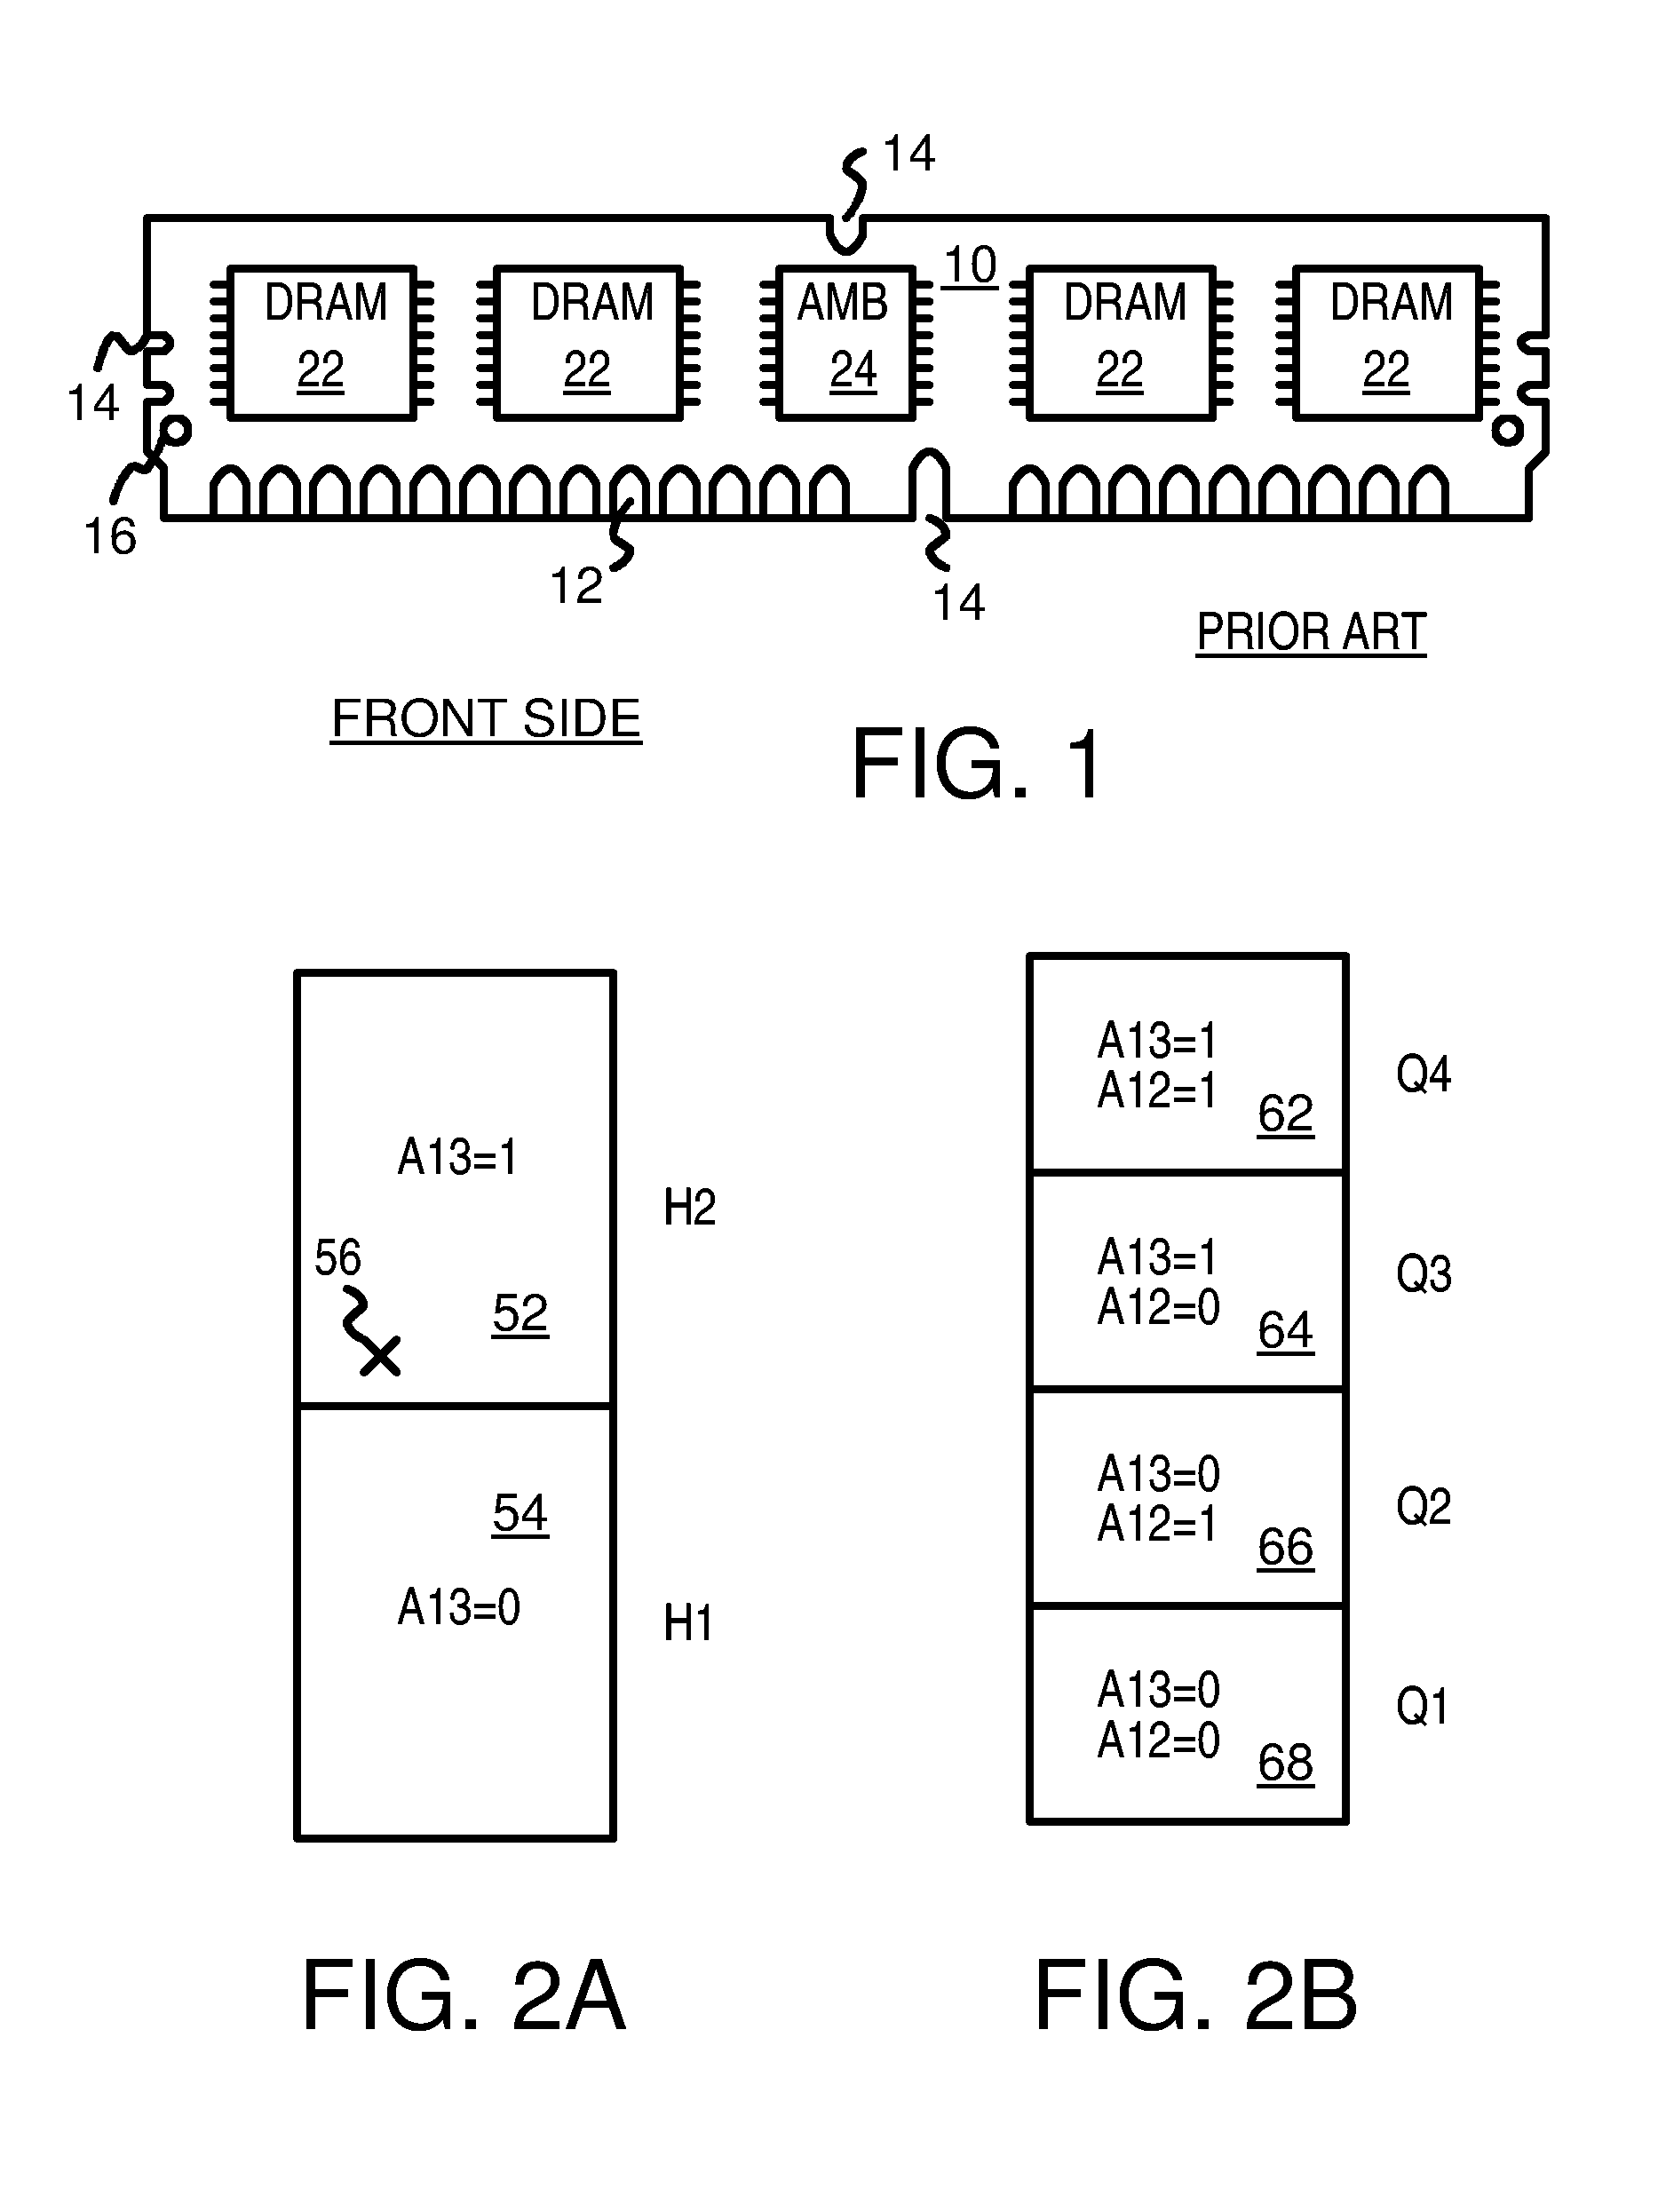 Memory module with a defective memory chip having defective blocks disabled by non-multiplexed address lines to the defective chip